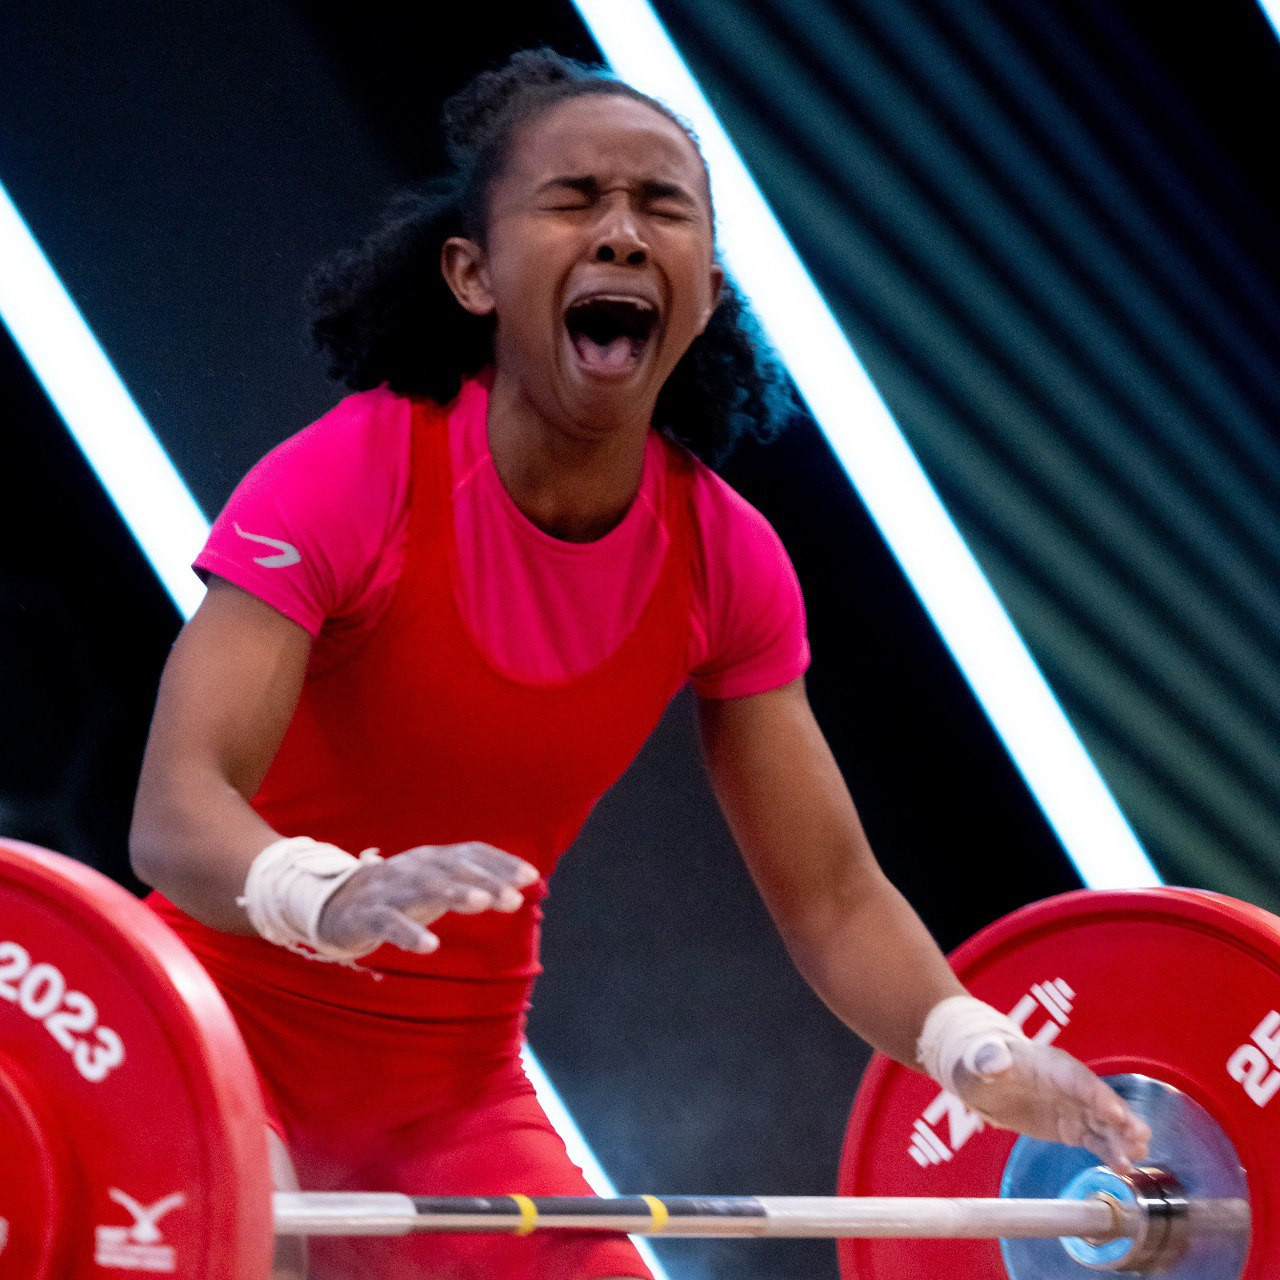 Rosina Randafiarison screamed with delight after her historic performance at the IWF World Championships ©IWF